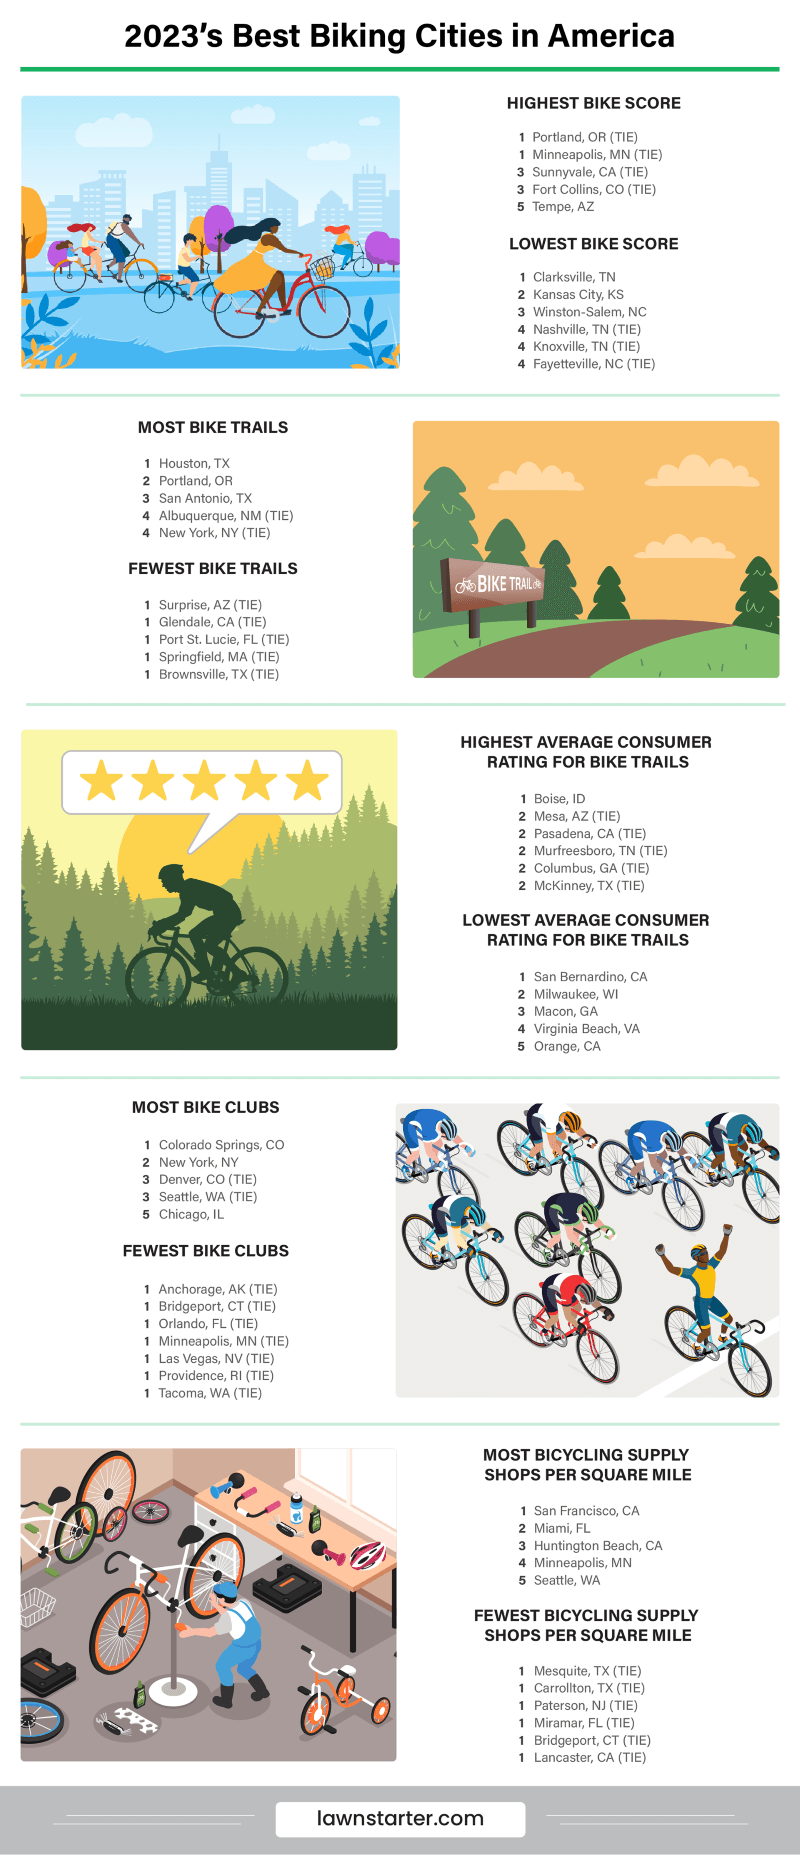 Infographic showing the Best Biking Cities in the U.S., a ranking based on access to bike lanes and clubs, cycling safety, cycling-friendly climate, and more